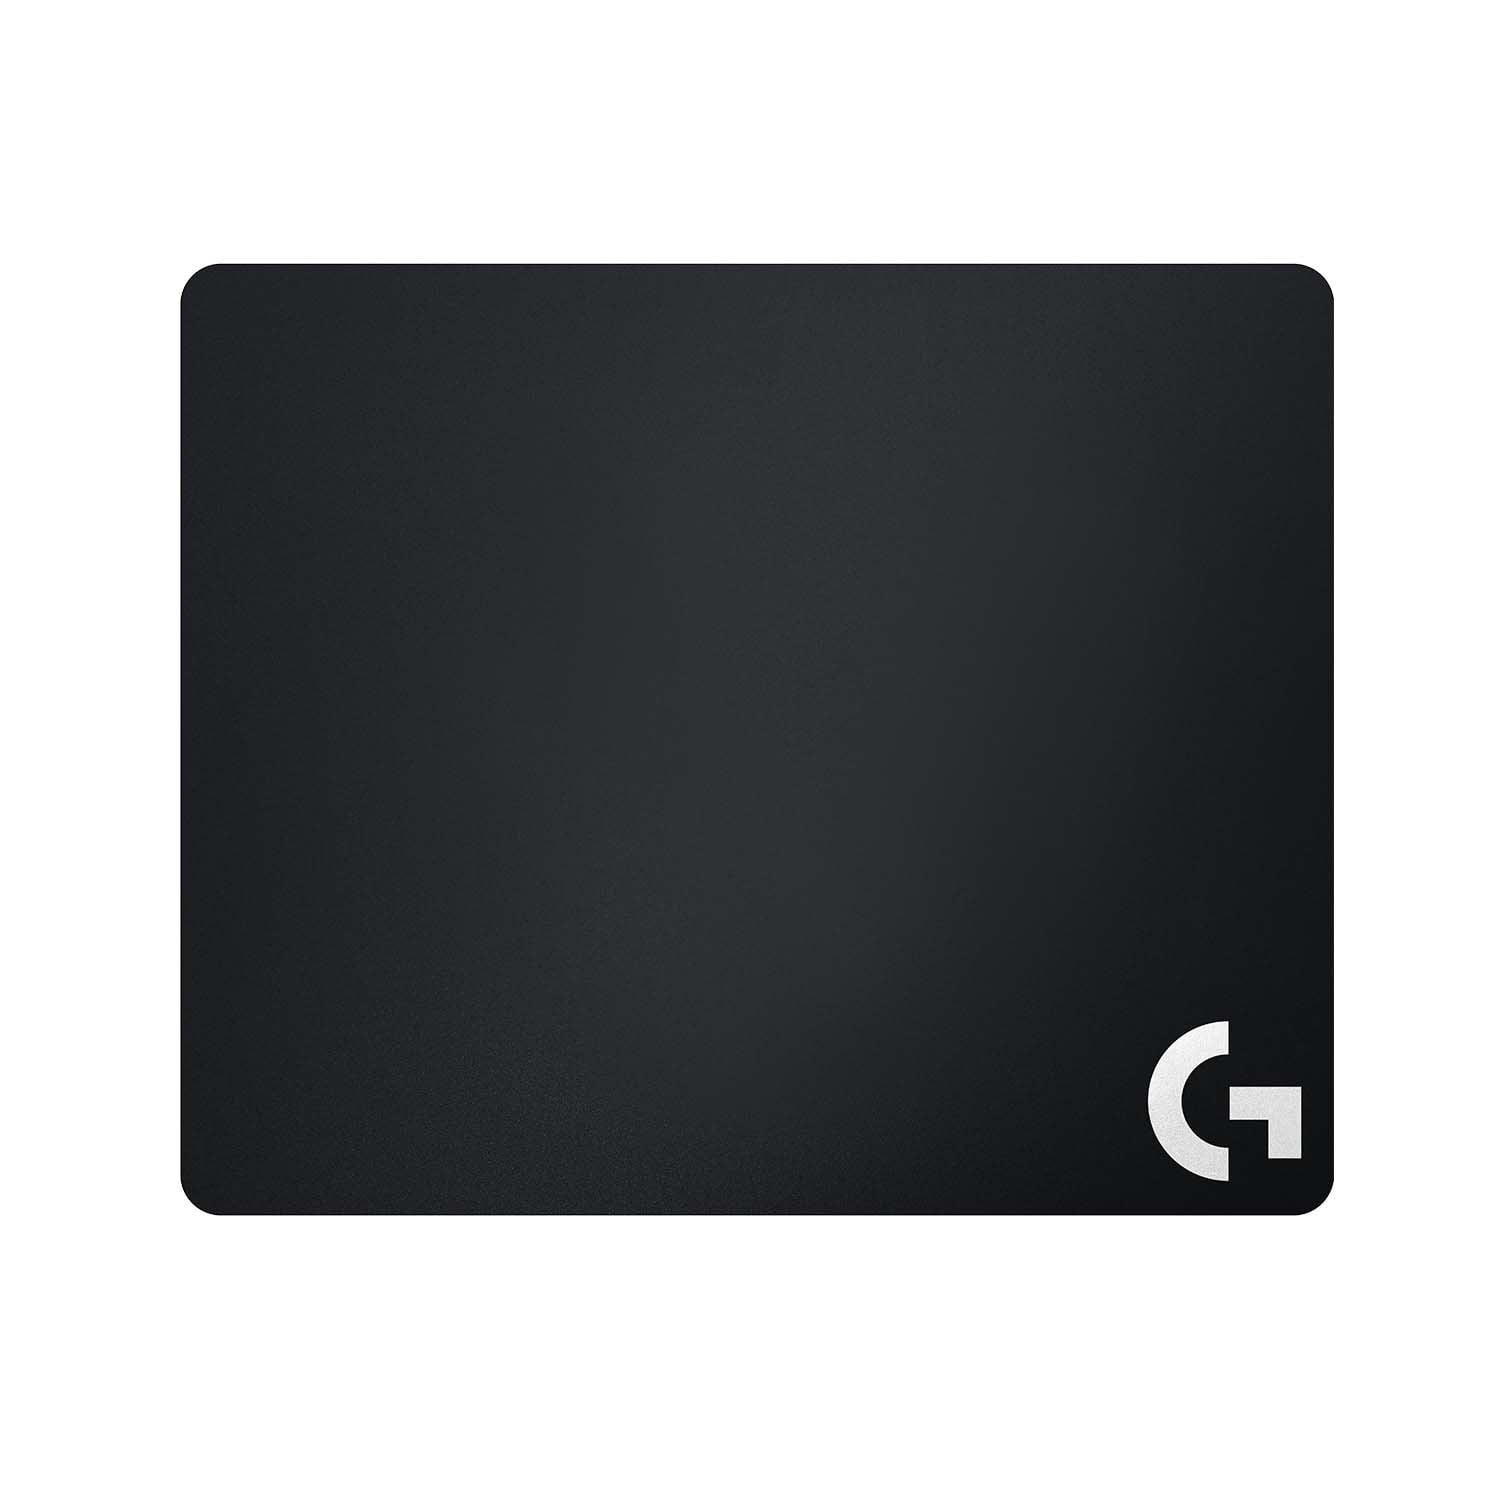 Logitech G240 Cloth Gaming Mouse Pad for Low DPI Gaming, Black